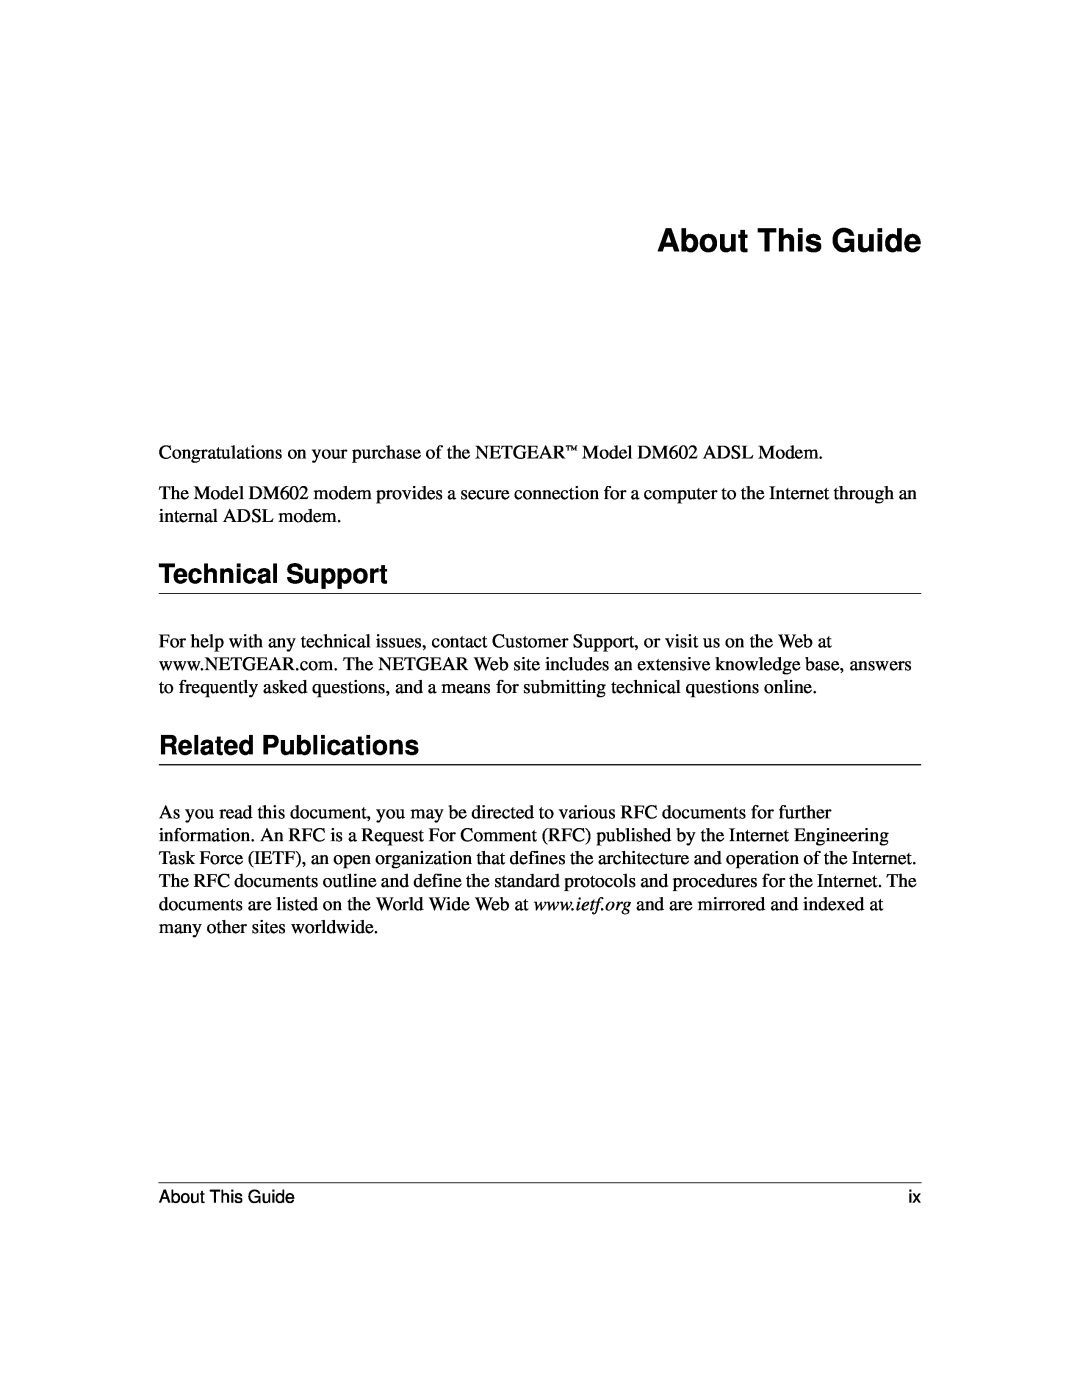 NETGEAR DM602 manual About This Guide, Technical Support, Related Publications 